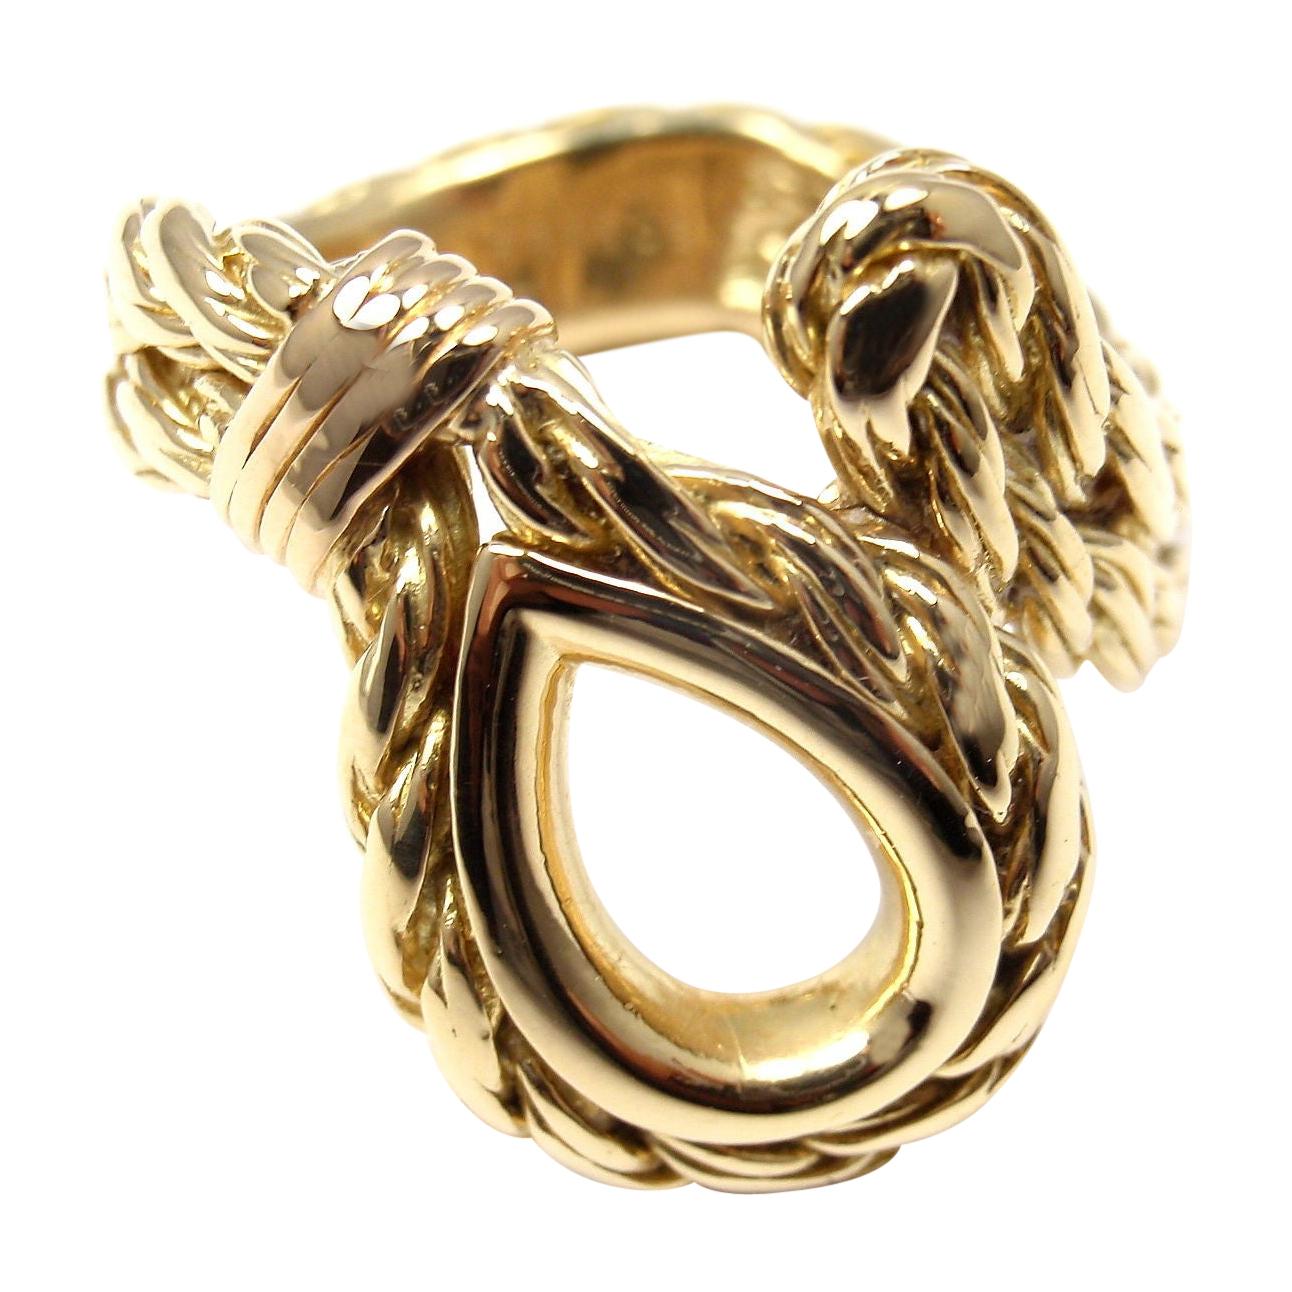 Tiffany & Co. France Yellow Gold Band Ring